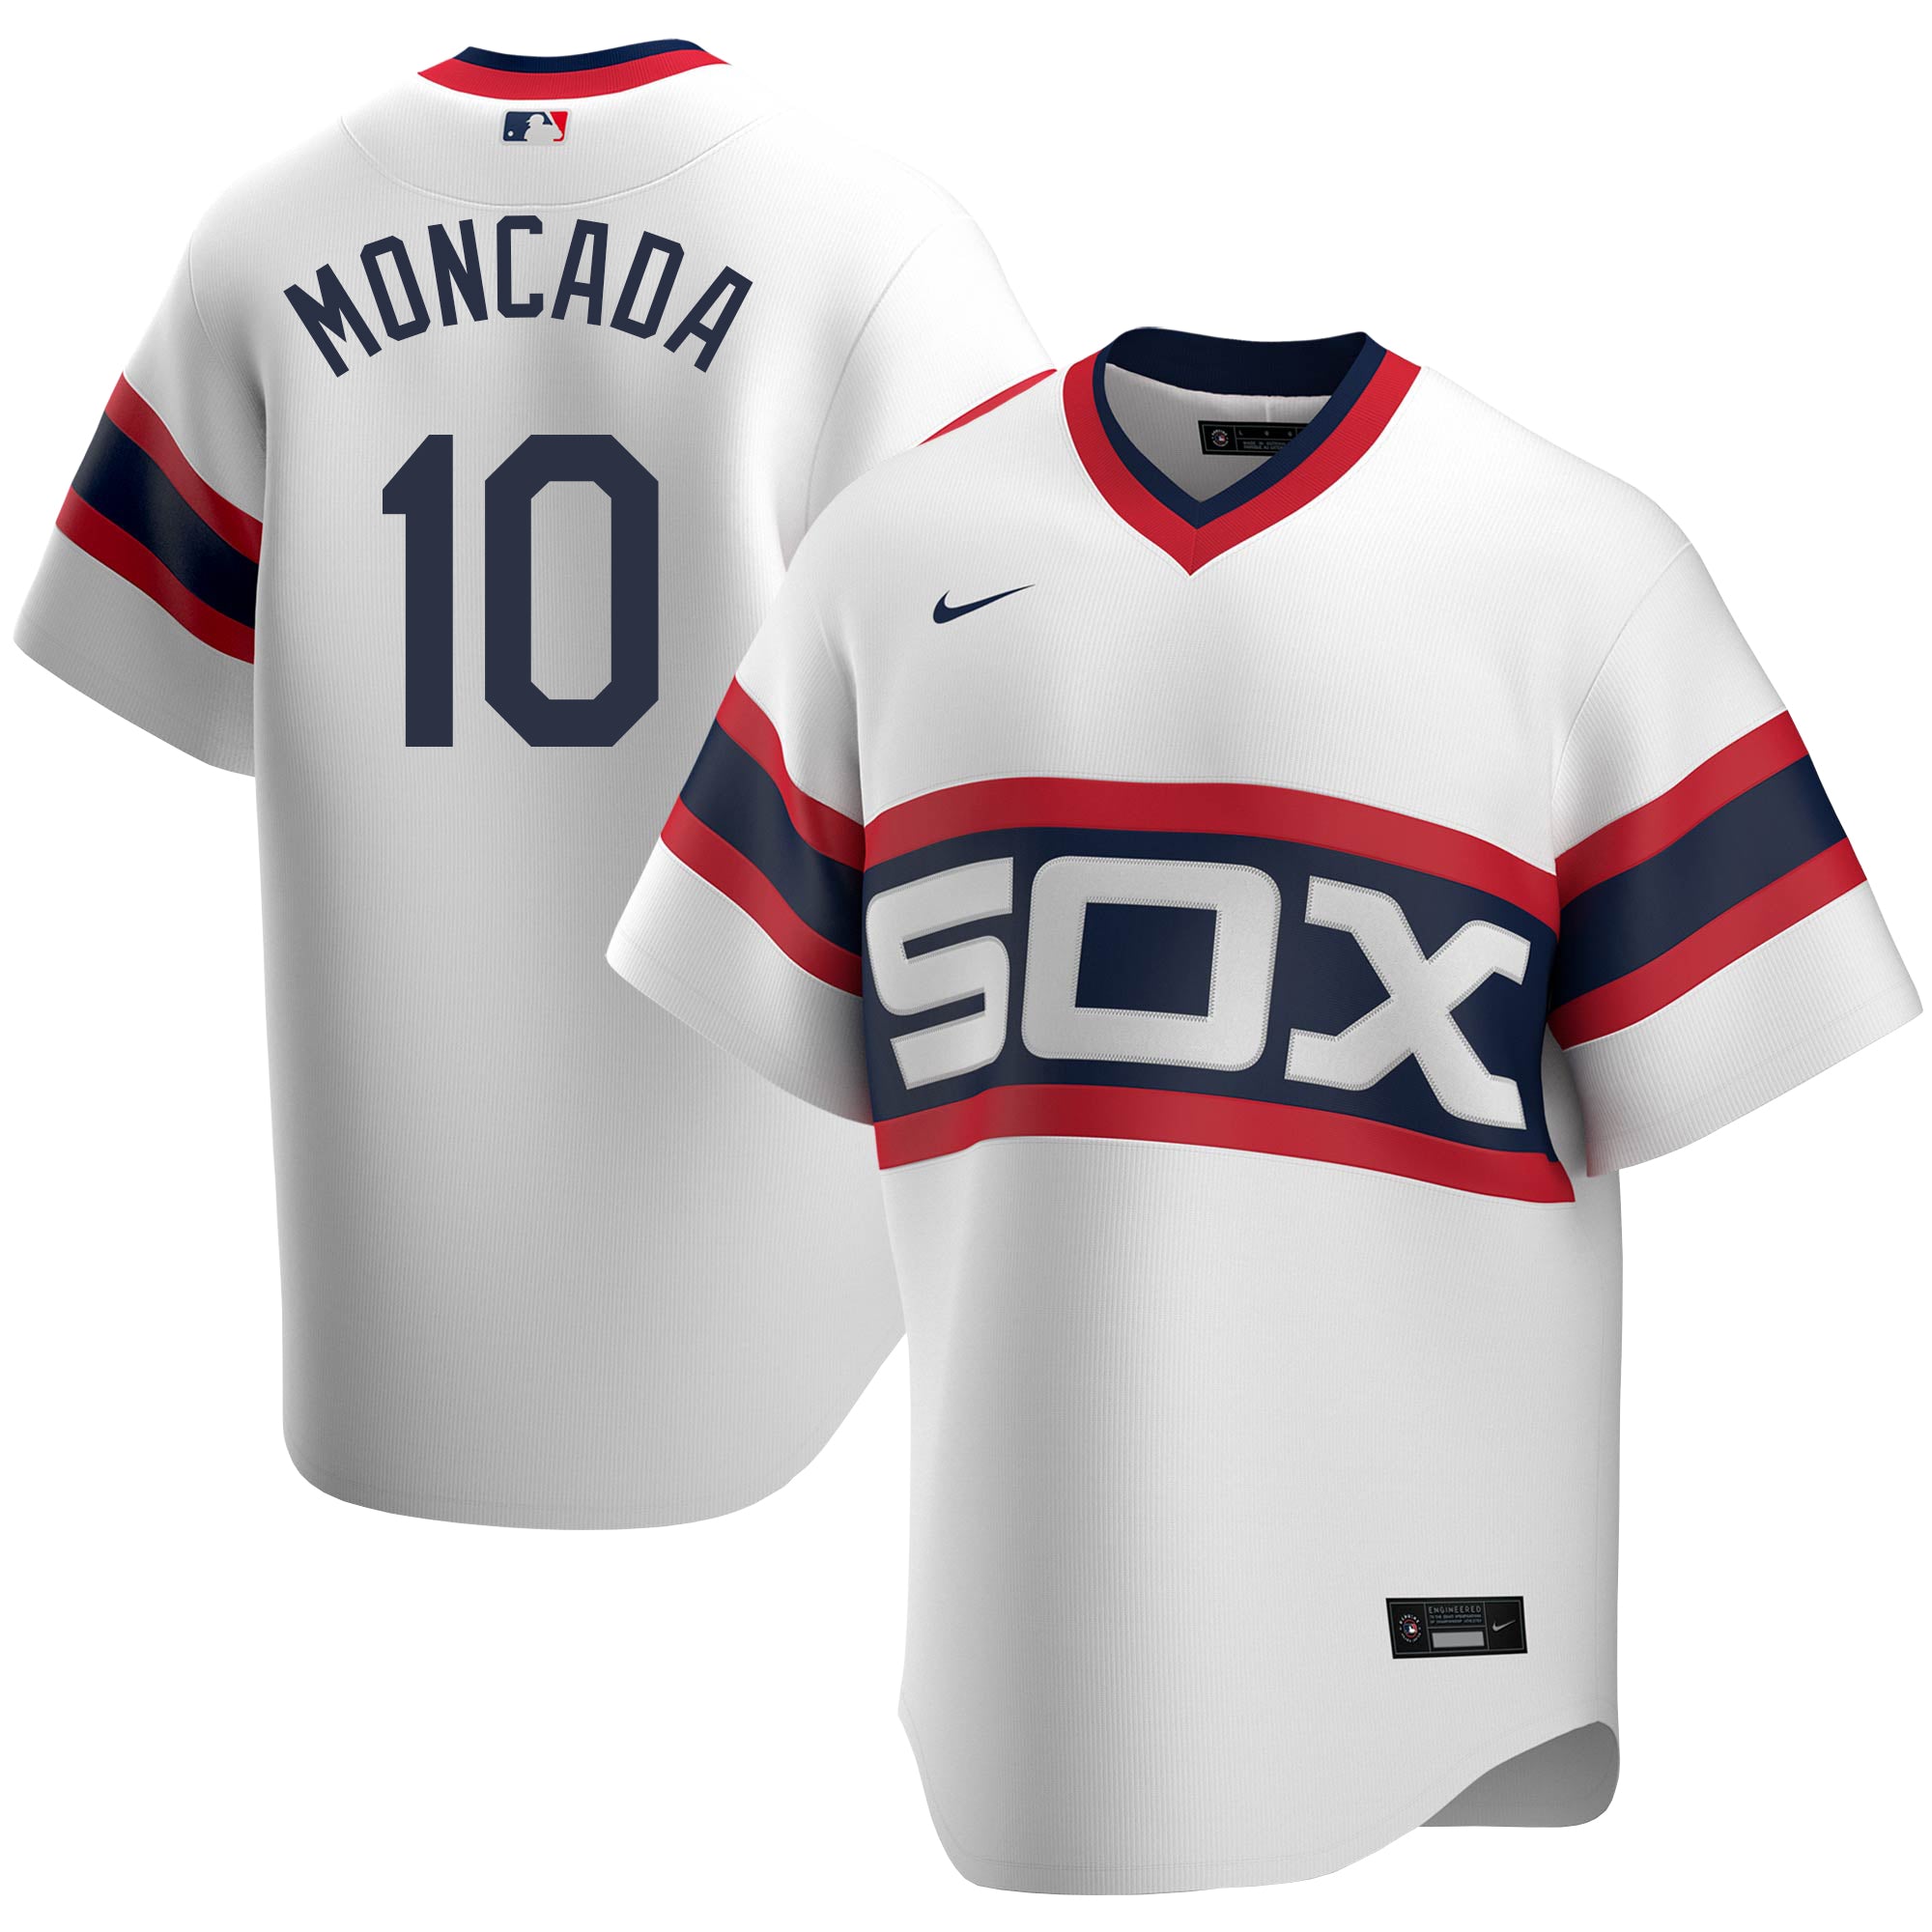 Fanatics Authentic Framed Yoan Moncada Chicago White Sox Autographed Nike City Connect Replica Jersey with South Siders Inscription